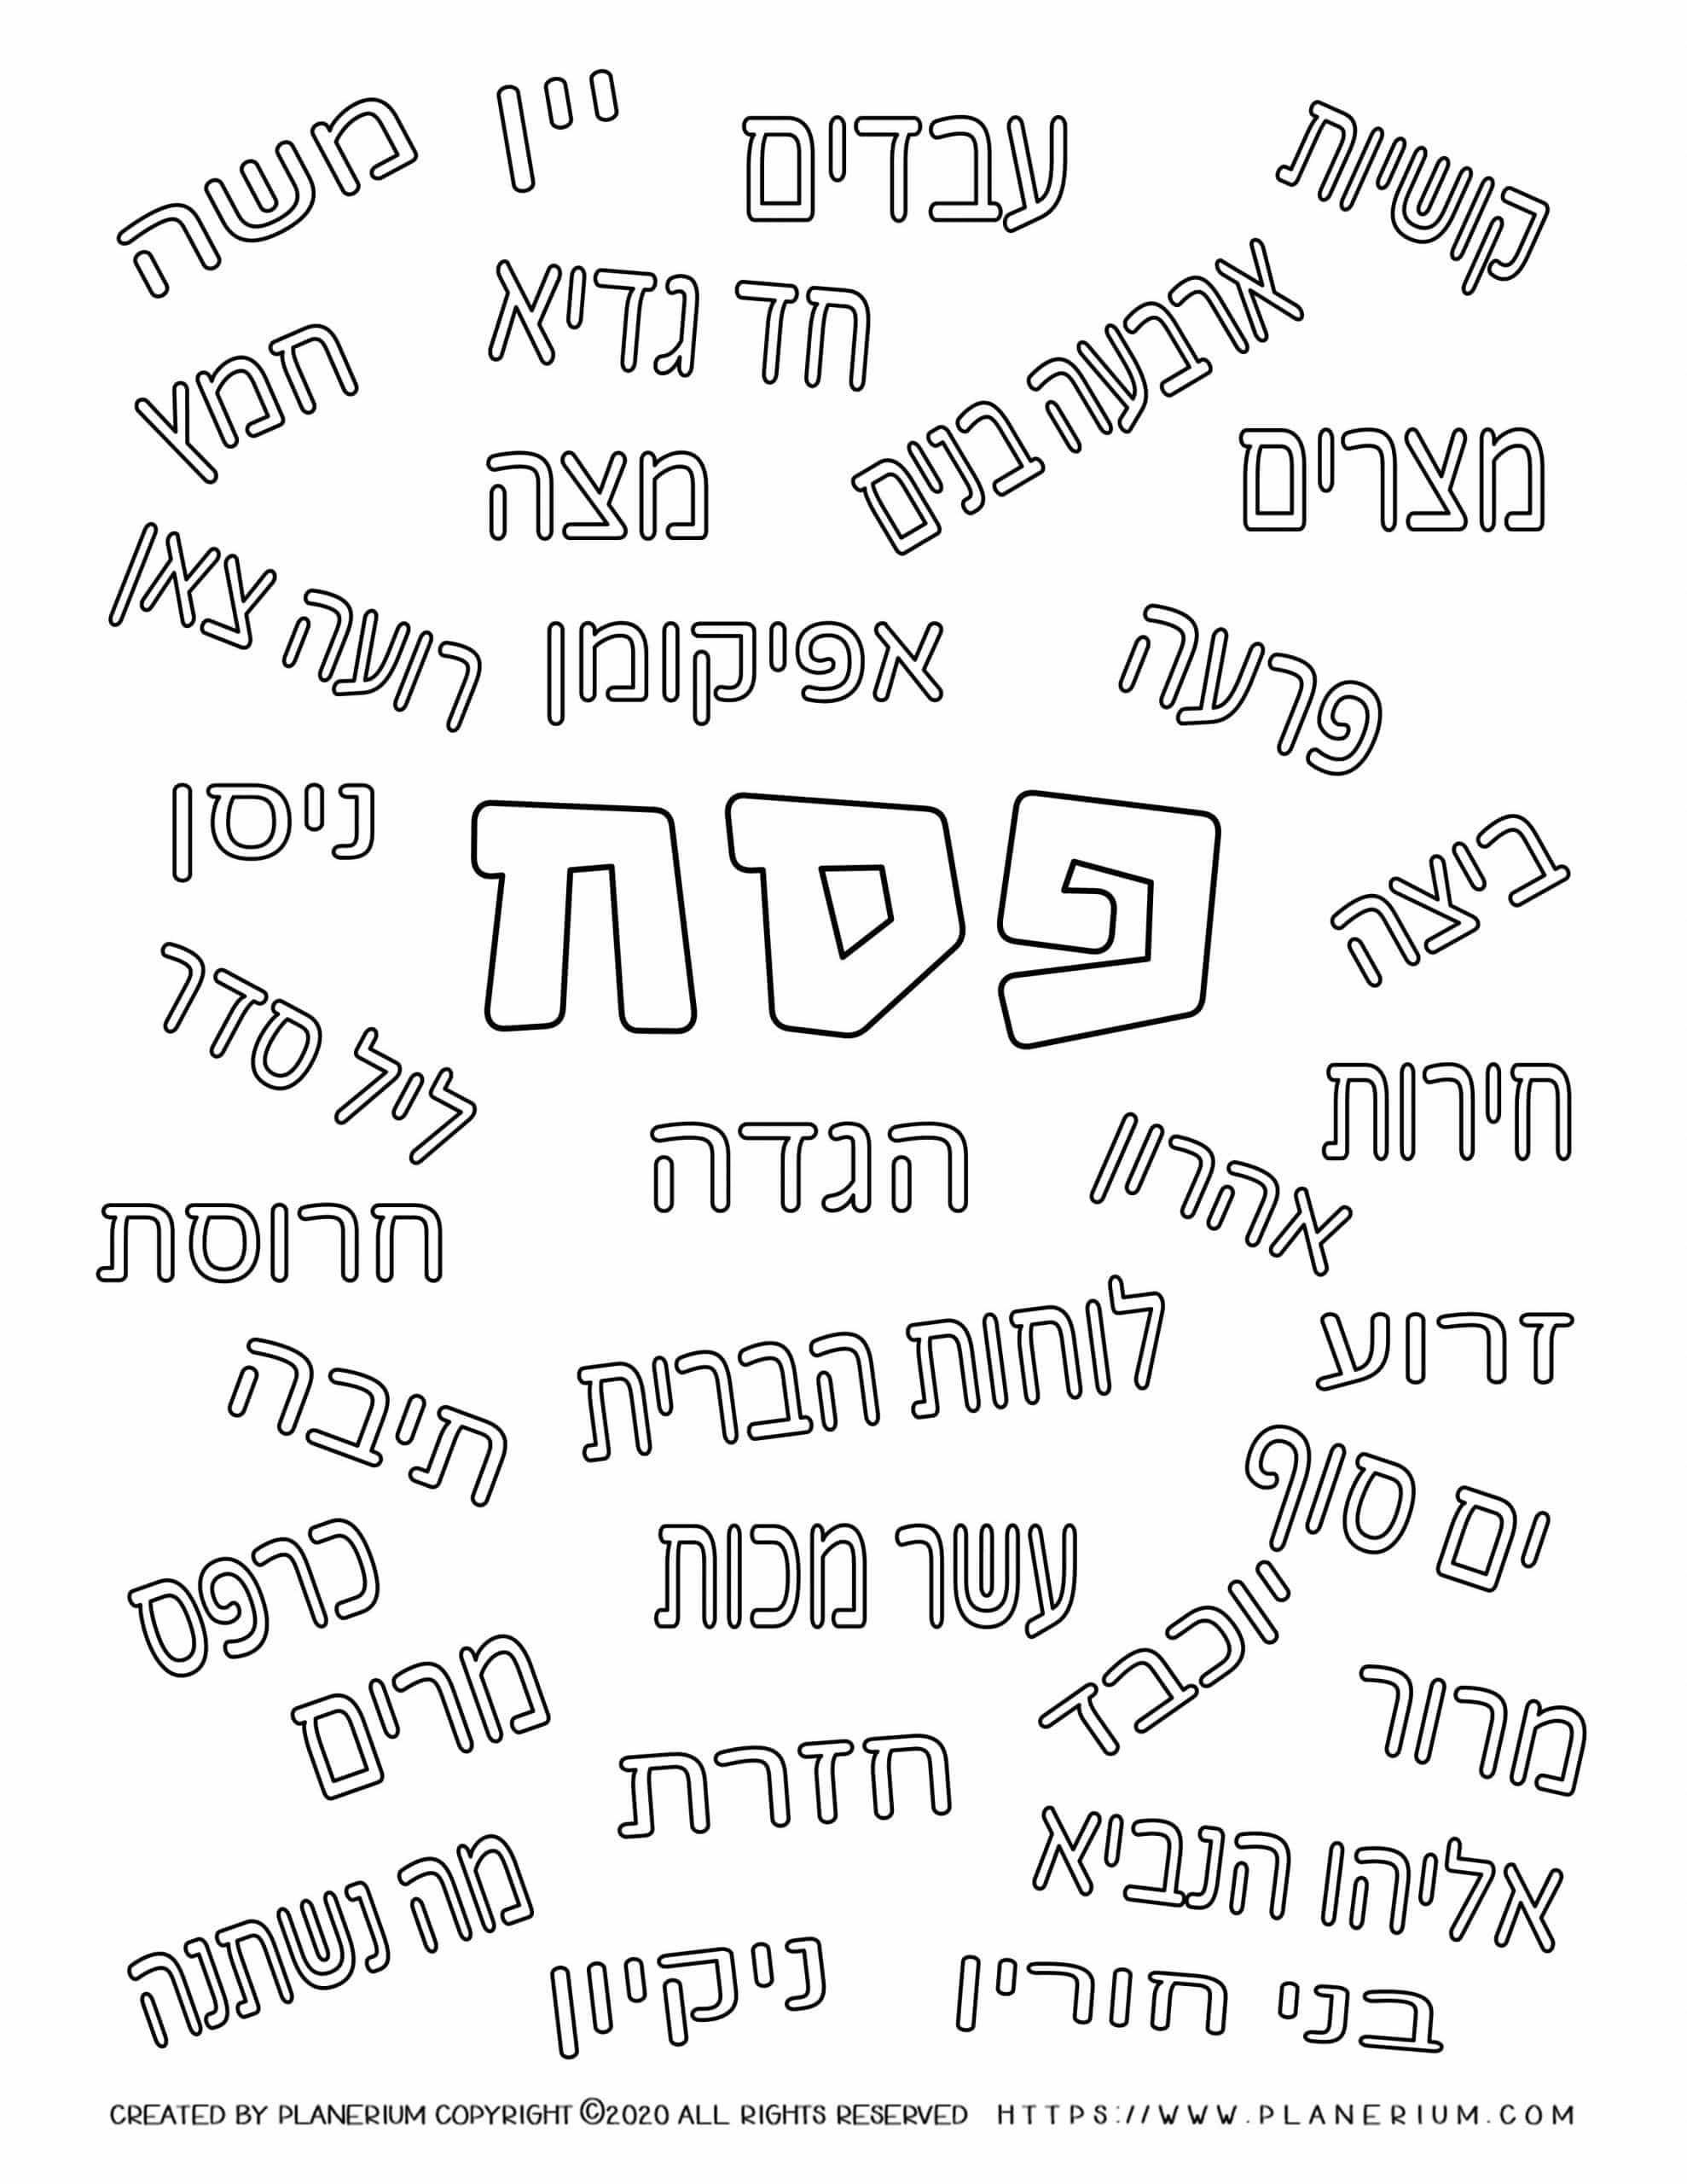 Passover worksheet - Color related words - Hebrew